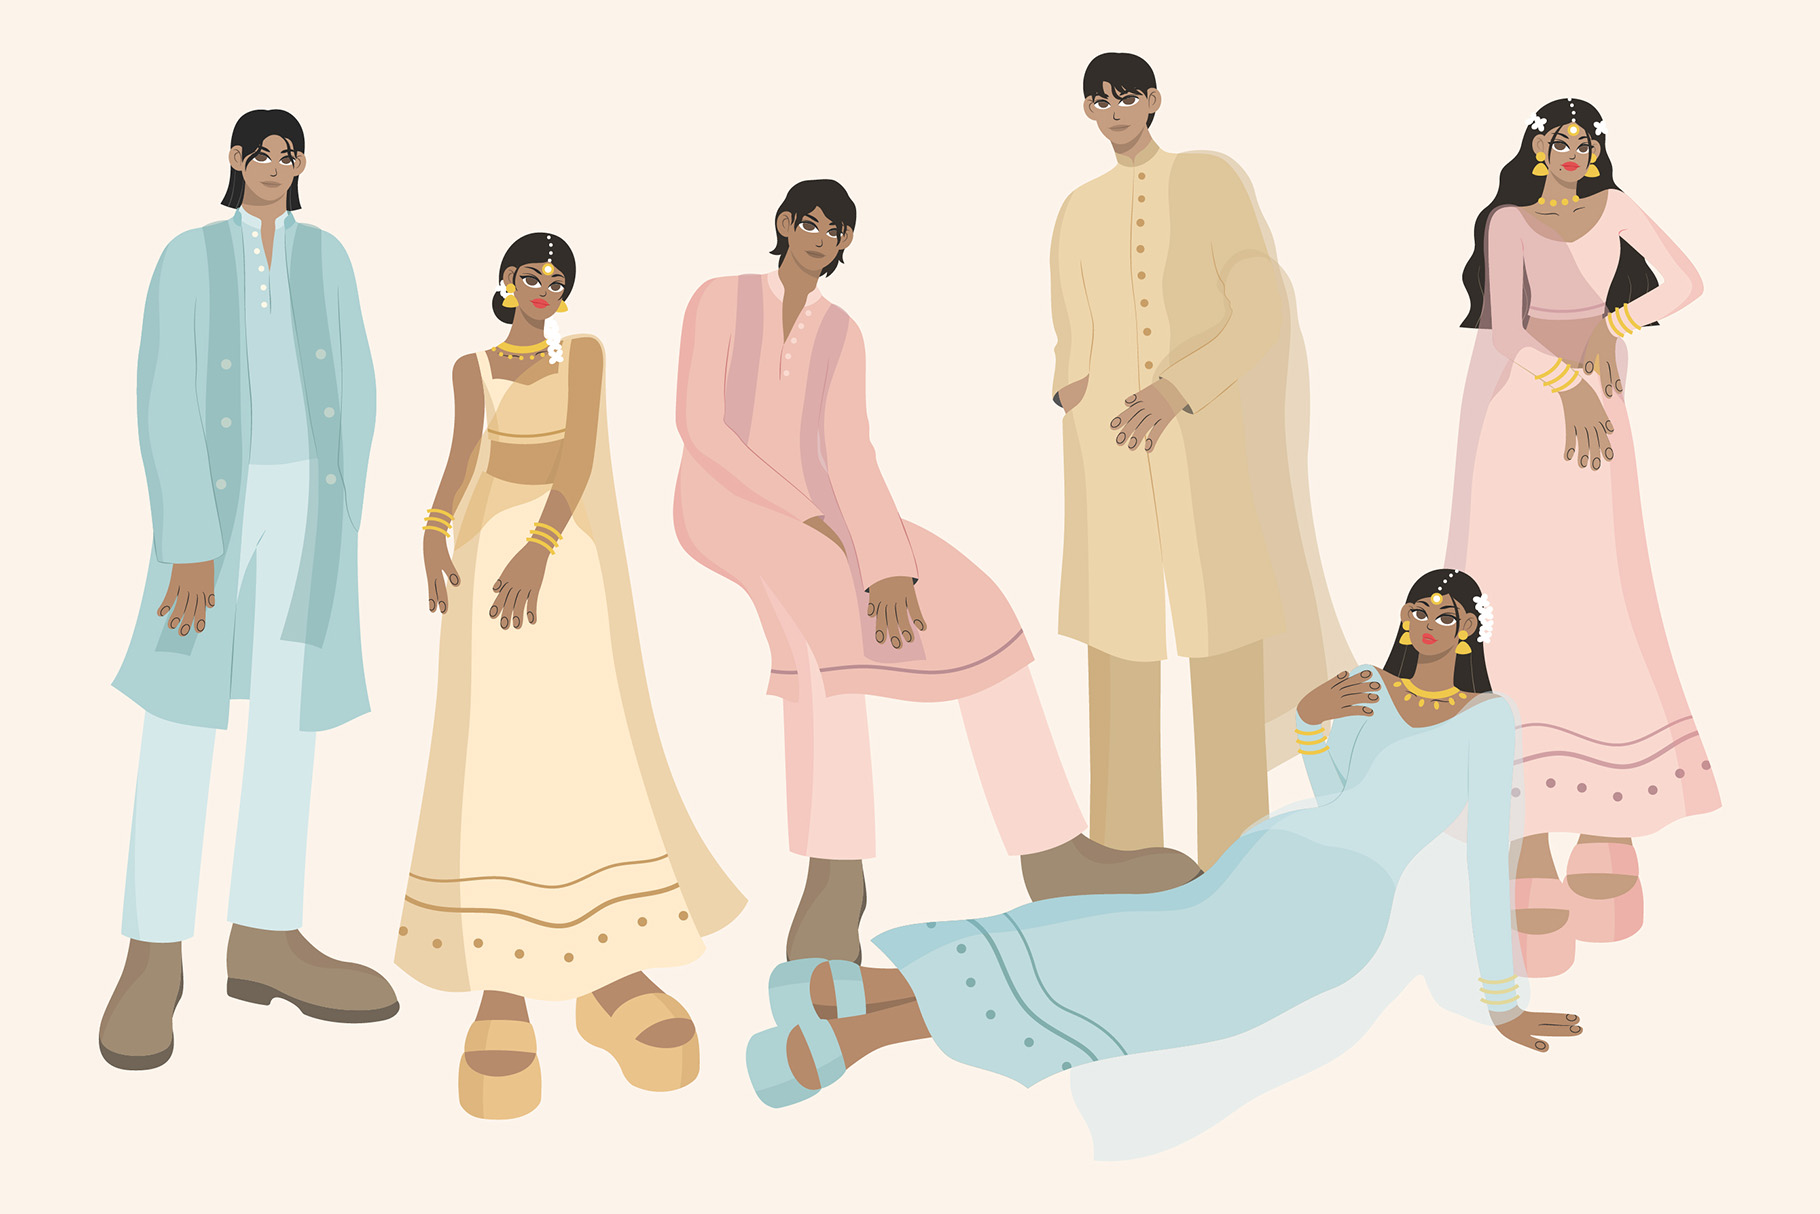 Indian People Illustrations Set (AI, EPS, PNG Format)